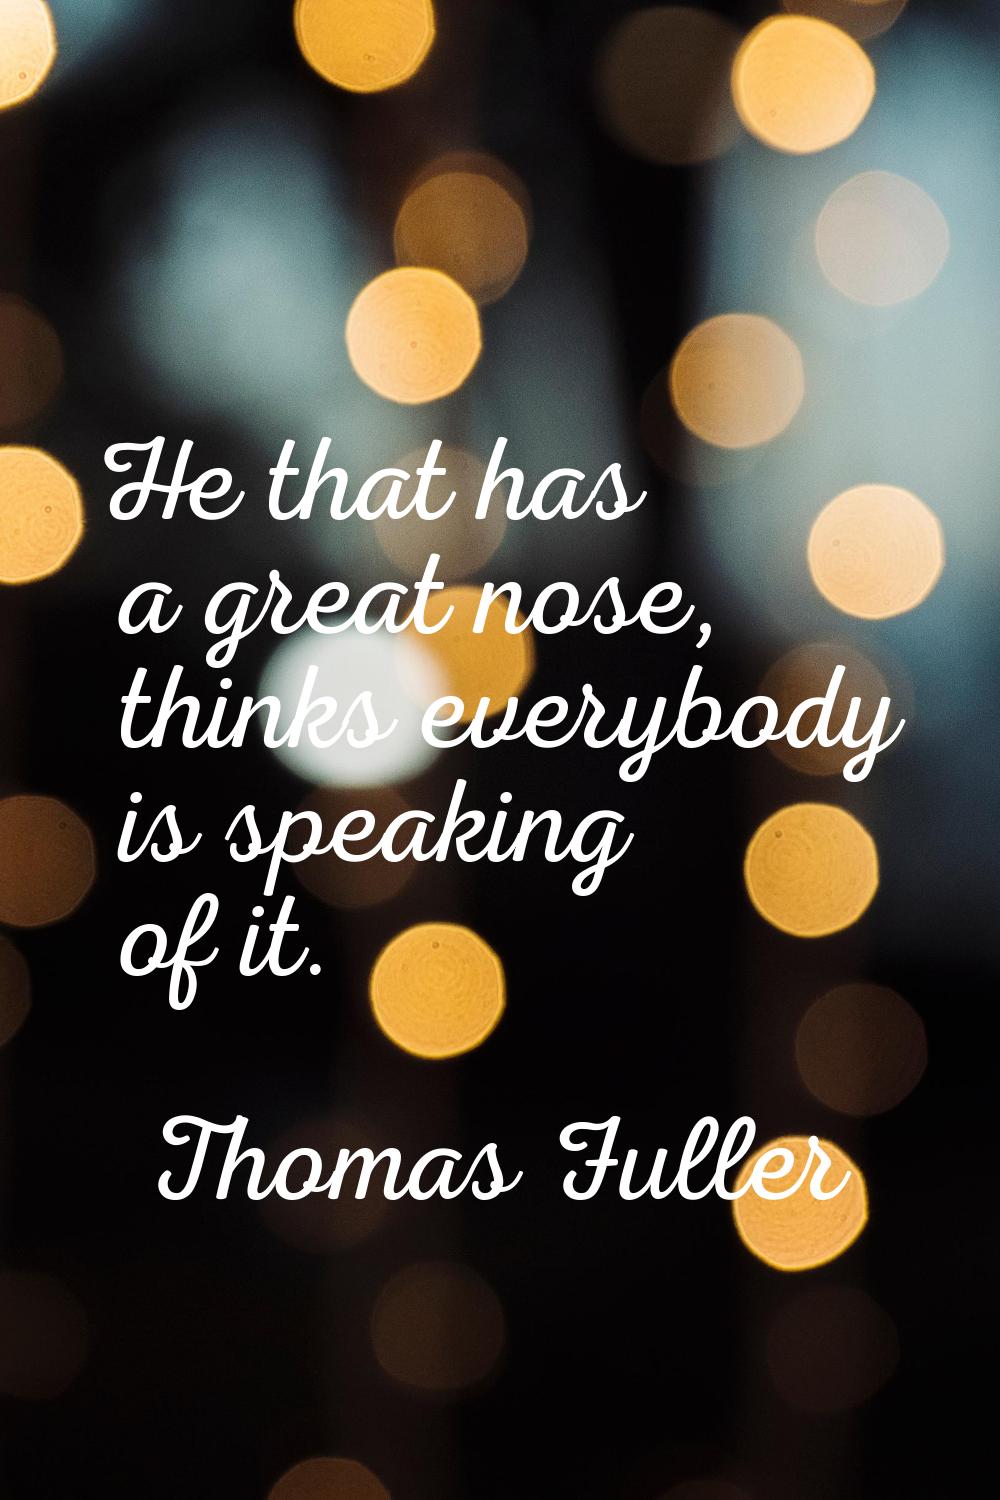 He that has a great nose, thinks everybody is speaking of it.